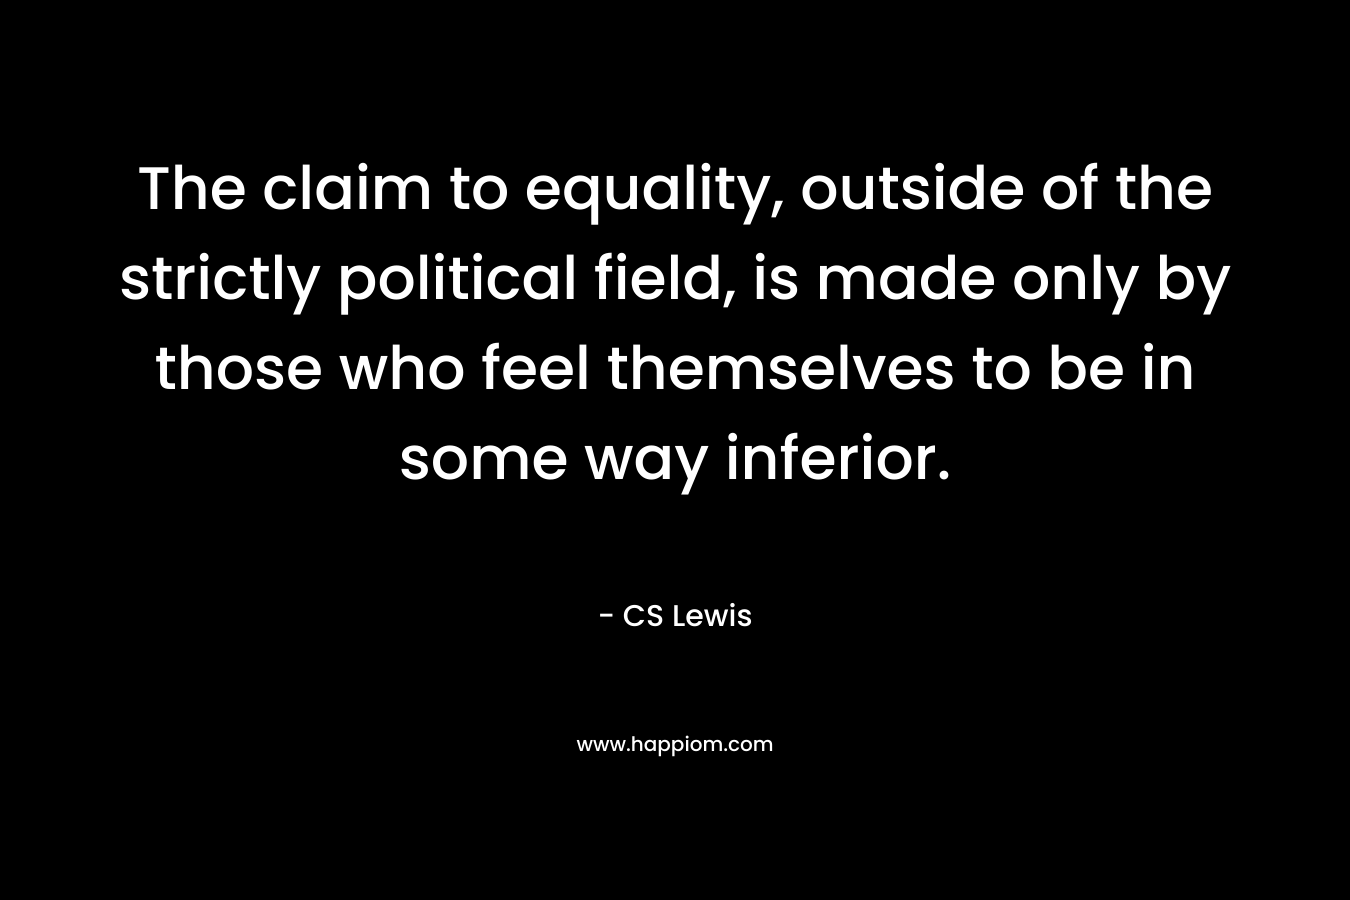 The claim to equality, outside of the strictly political field, is made only by those who feel themselves to be in some way inferior. – CS Lewis